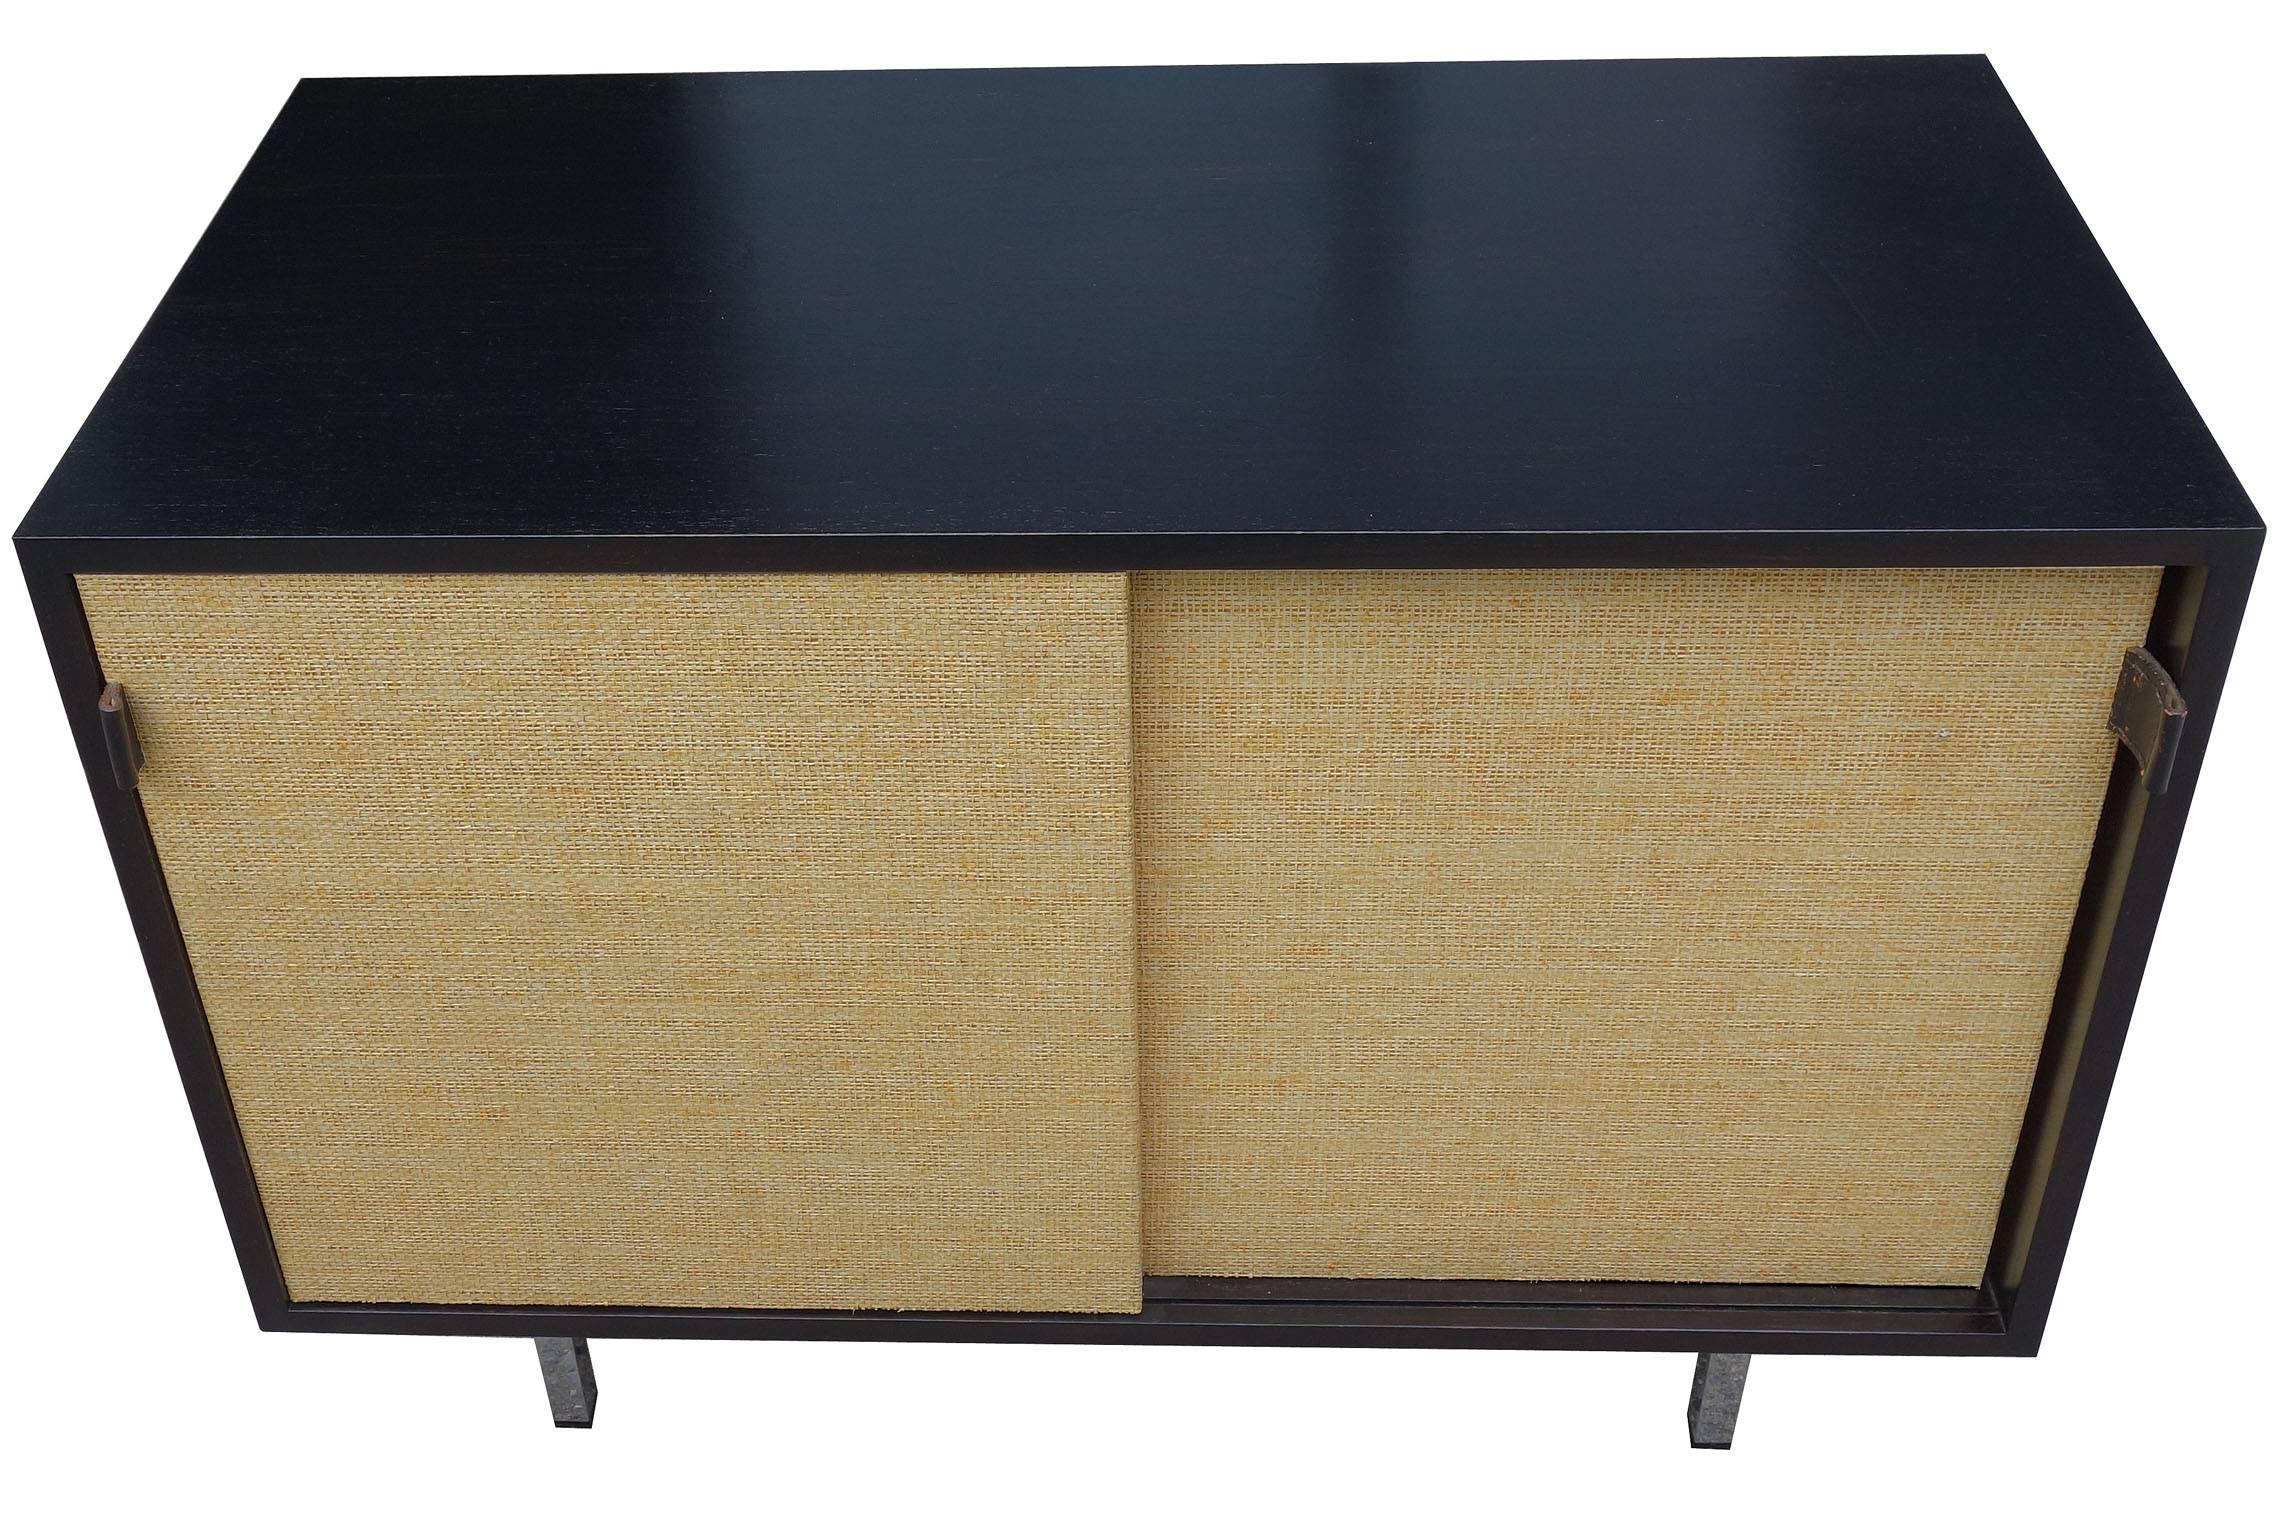 Midcentury Florence knoll cabinet. Featuring an ebonized wood cabinet on chromed steel legs. Woven doors and leather pulls are in great condition. This cabinet or credenza is an ideal size perfect for any room that needs more storage.